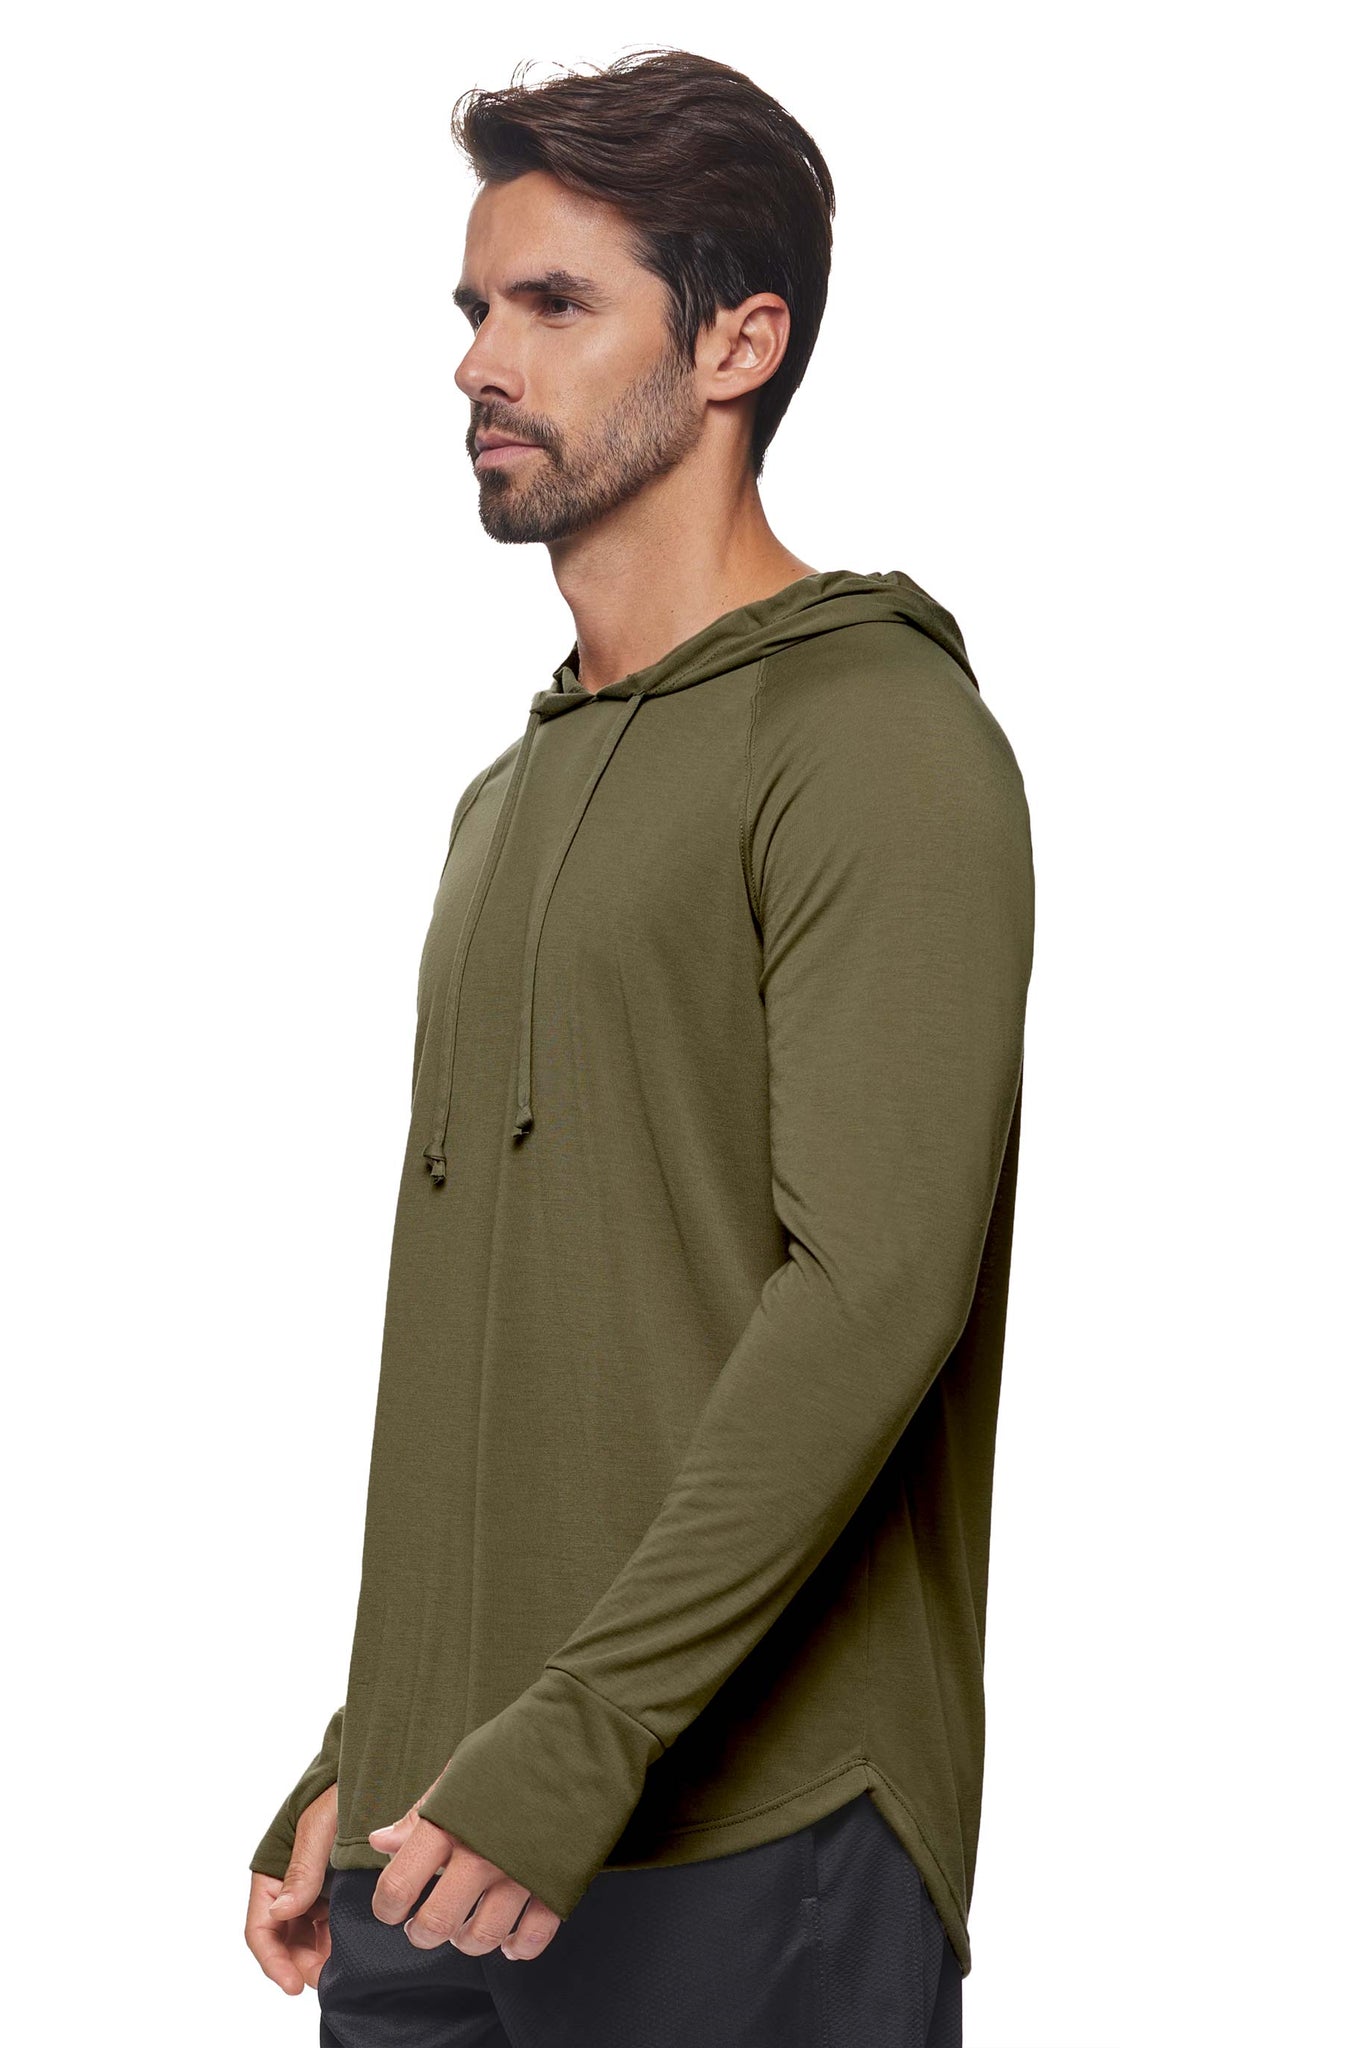 Expert Brand wholesale men's siro Hoodie Shirt made in usa olive#olive